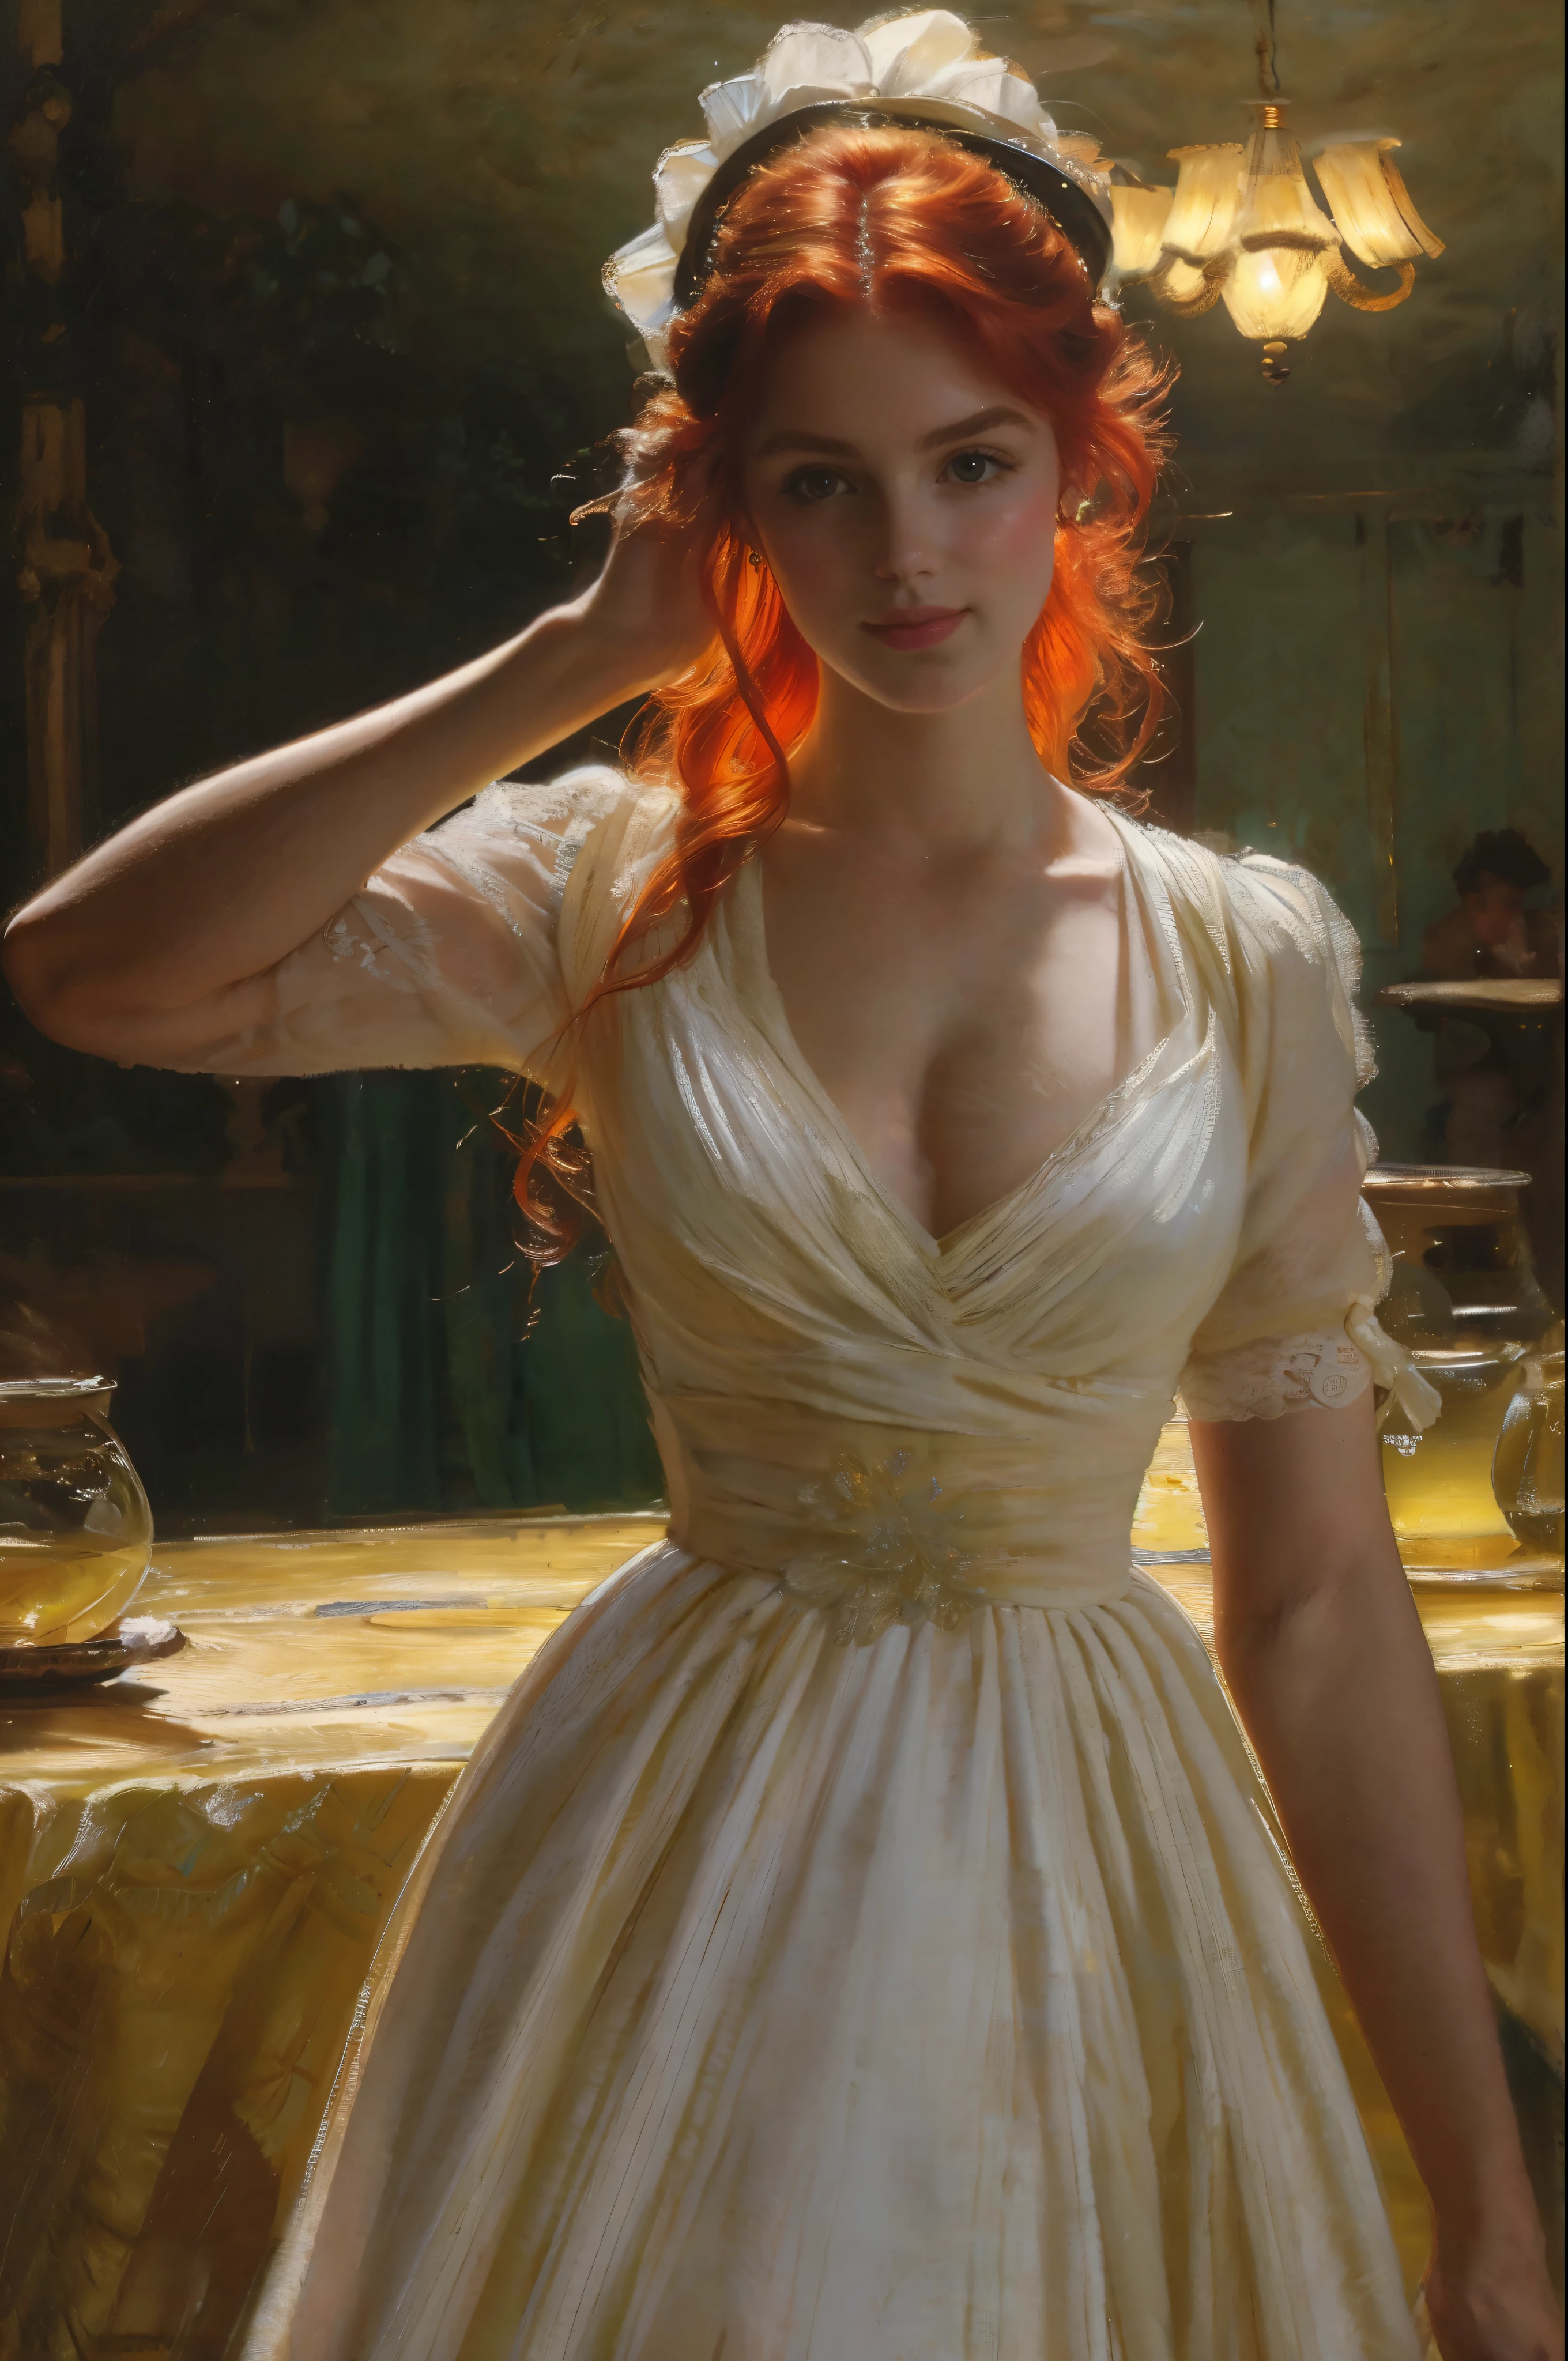 Create an image that captures the essence of classical art and award-winning painting, drawing inspiration from Monet oil paintings. Visualize a enchanting oil painting of beautiful red hair female wearing maid outfit in a Cafe. Her skin should be meticulously detailed, with eyes that glow with life, and a facial structure that fits the golden ratio of attractiveness, including clear double eyelids. | She is moving with a dynamic and bold grace. The setting is a cafe with an indoor garden, with her poised under the warm light of sunlight, casting striking shadows around her. Capture her from a low angle to reveal her whole body in a dynamic pose, adding to the intensity of the scene. She looks dreamy, her expression both engaging and ethereal. | Rendered in ultra-high detail and quality, this masterpiece ensures anatomical correctness and textured skin with super detail. With a focus on high quality and accuracy, this award-winning portrayal captures every nuance in stunning 16k resolution, immersing viewers in its lifelike depiction. | ((beautiful red hair female):1.1), ((maid outfit):1.1), ((in a cafe):1.1), ((indoor garden):1.1). | (((anatomical correctness))), (((perfect_fingers))), (((perfect_legs))), (((perfect_hands))), ((perfect_composition, perfect_design, perfect_layout, perfect_detail, ultra_detailed)), ((enhance_all, fix_everything)), More Detail, Enhance.
